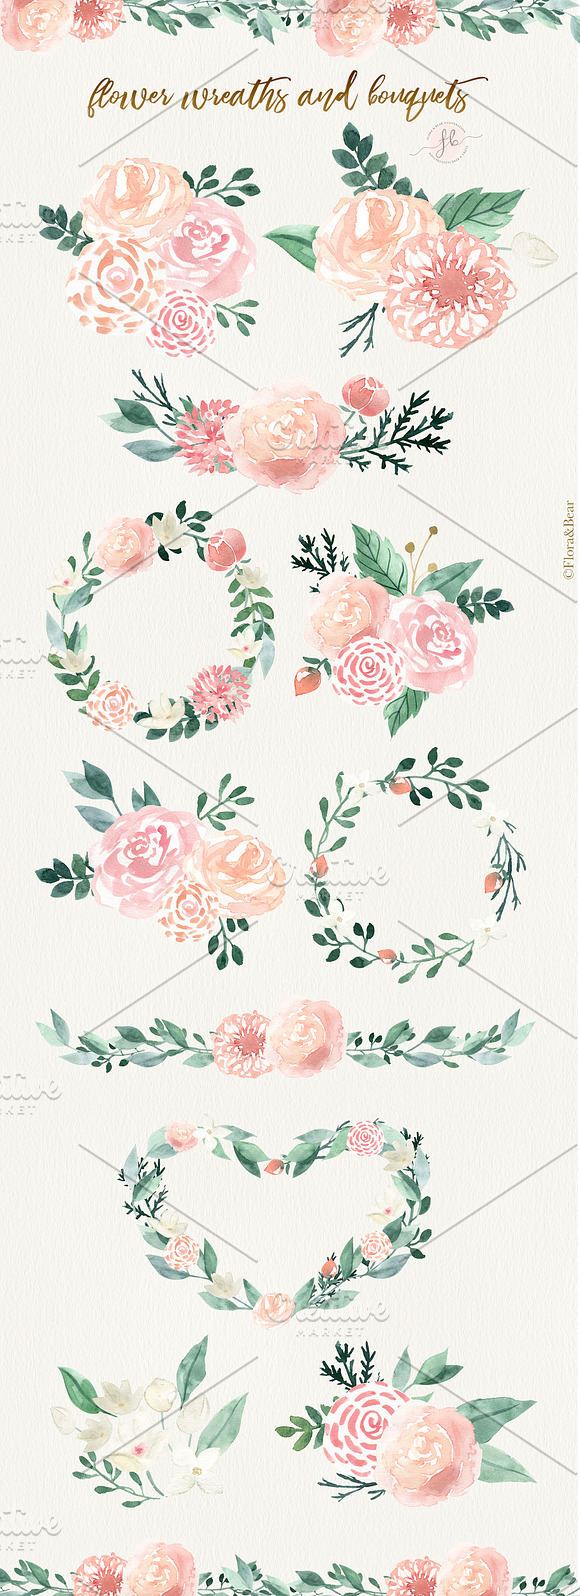 Boho Wedding in Illustrations - product preview 3